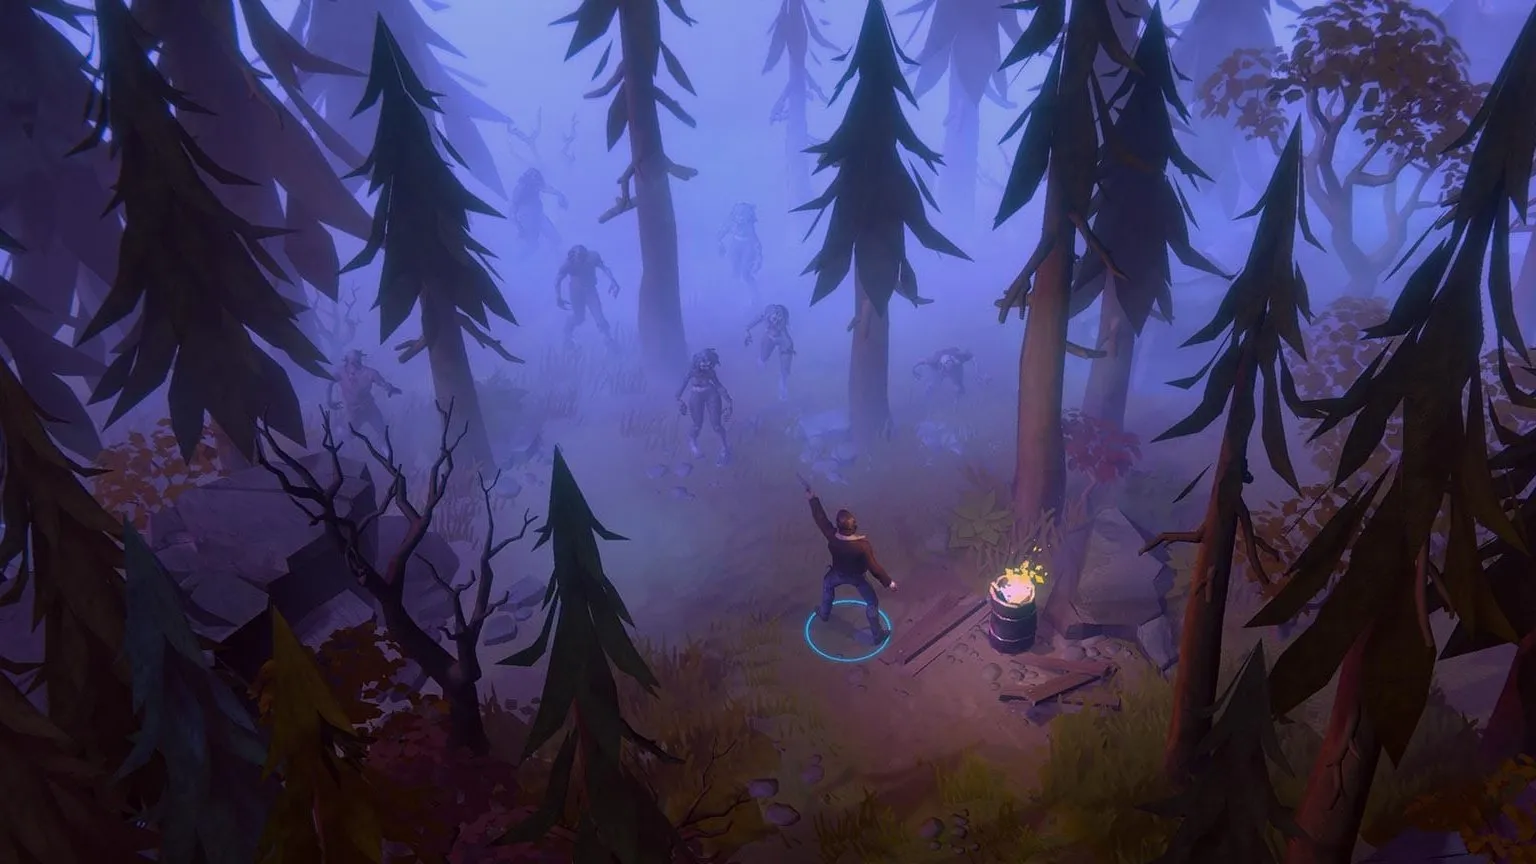 game still image showing man in misty forest at night with a campfire. He aims a gun at a group of zombies emerging from trees.